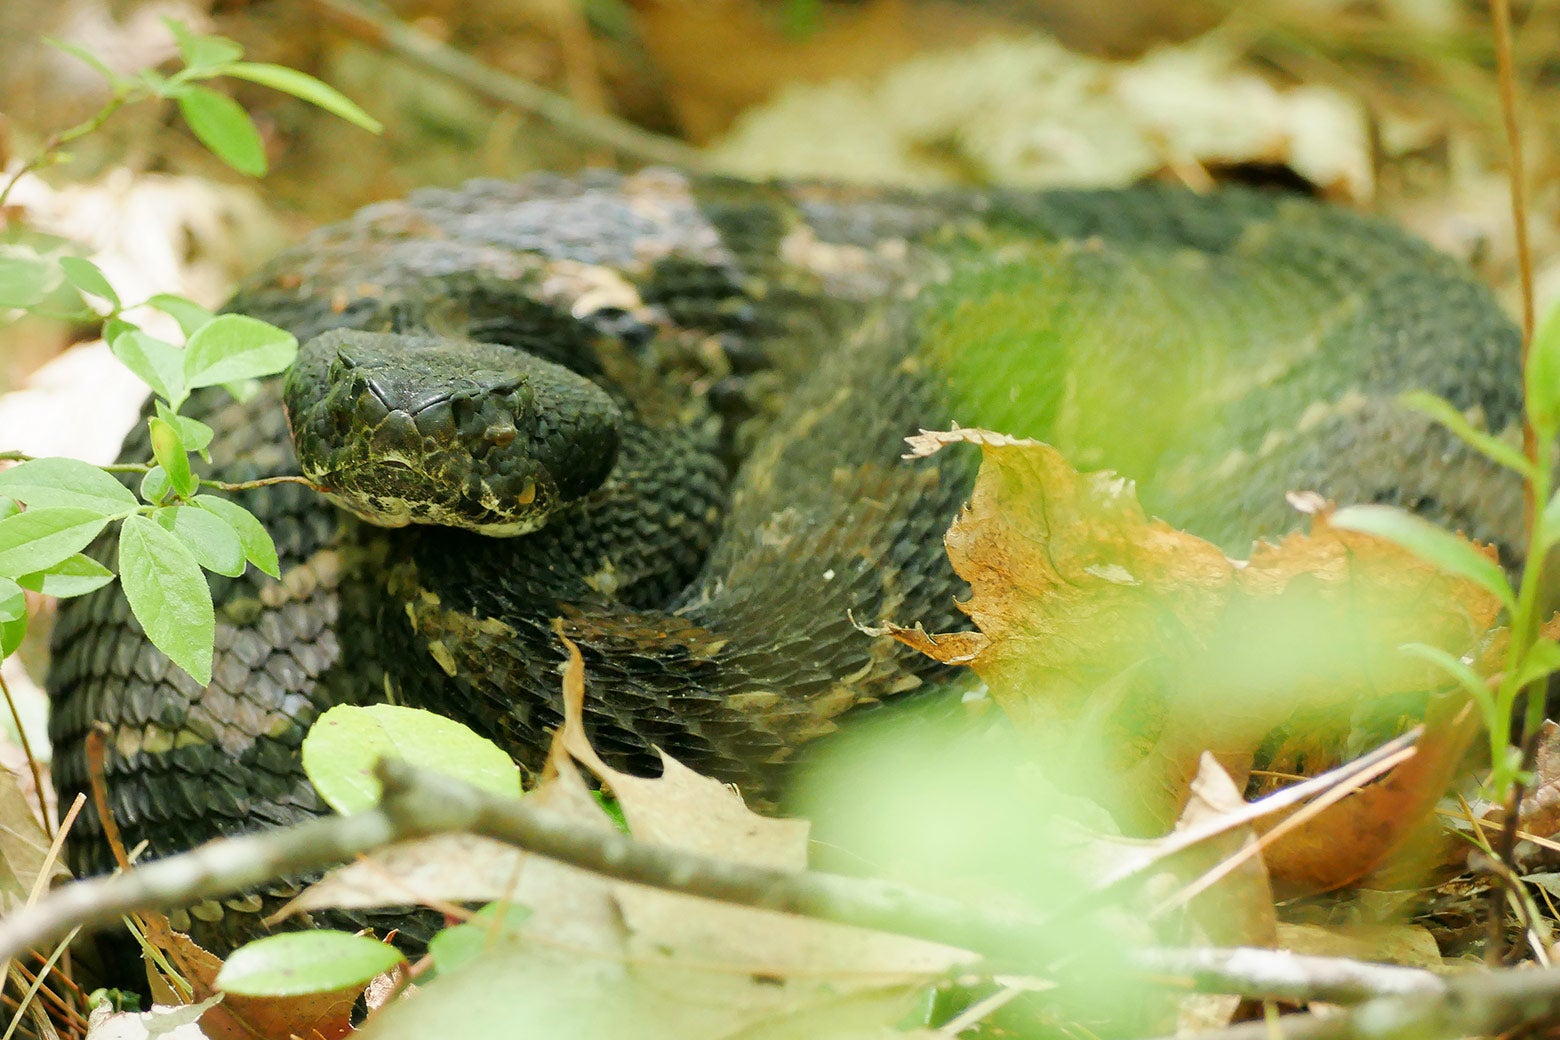 A rattlesnake in the grass.